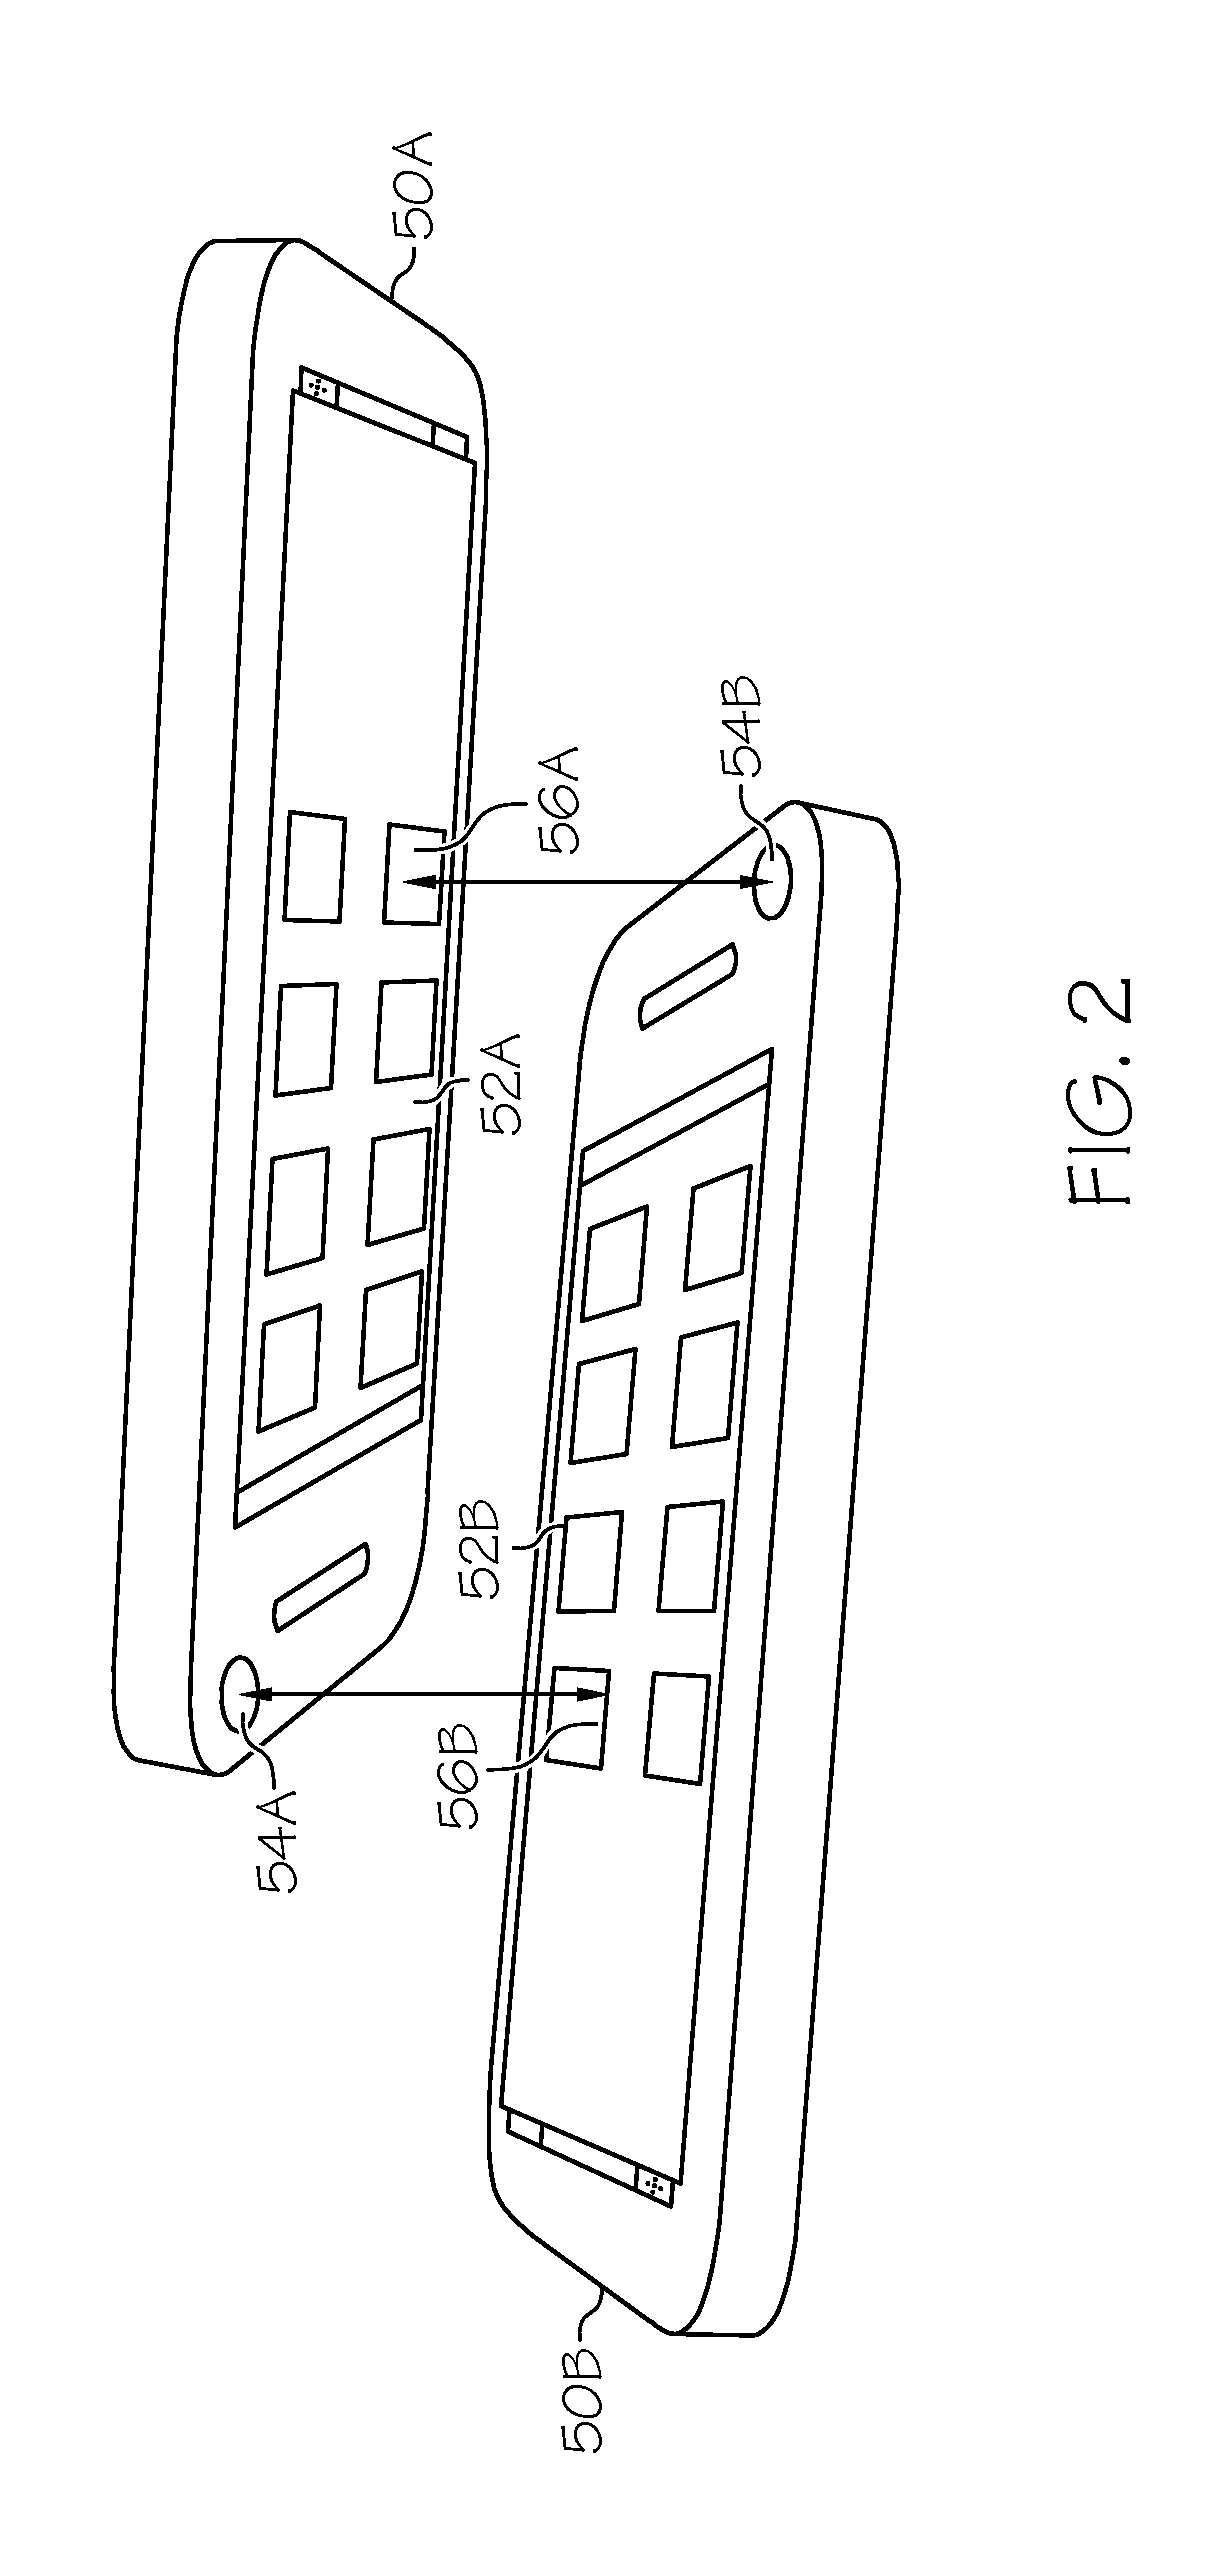 Mobile device digital communication and authentication methods